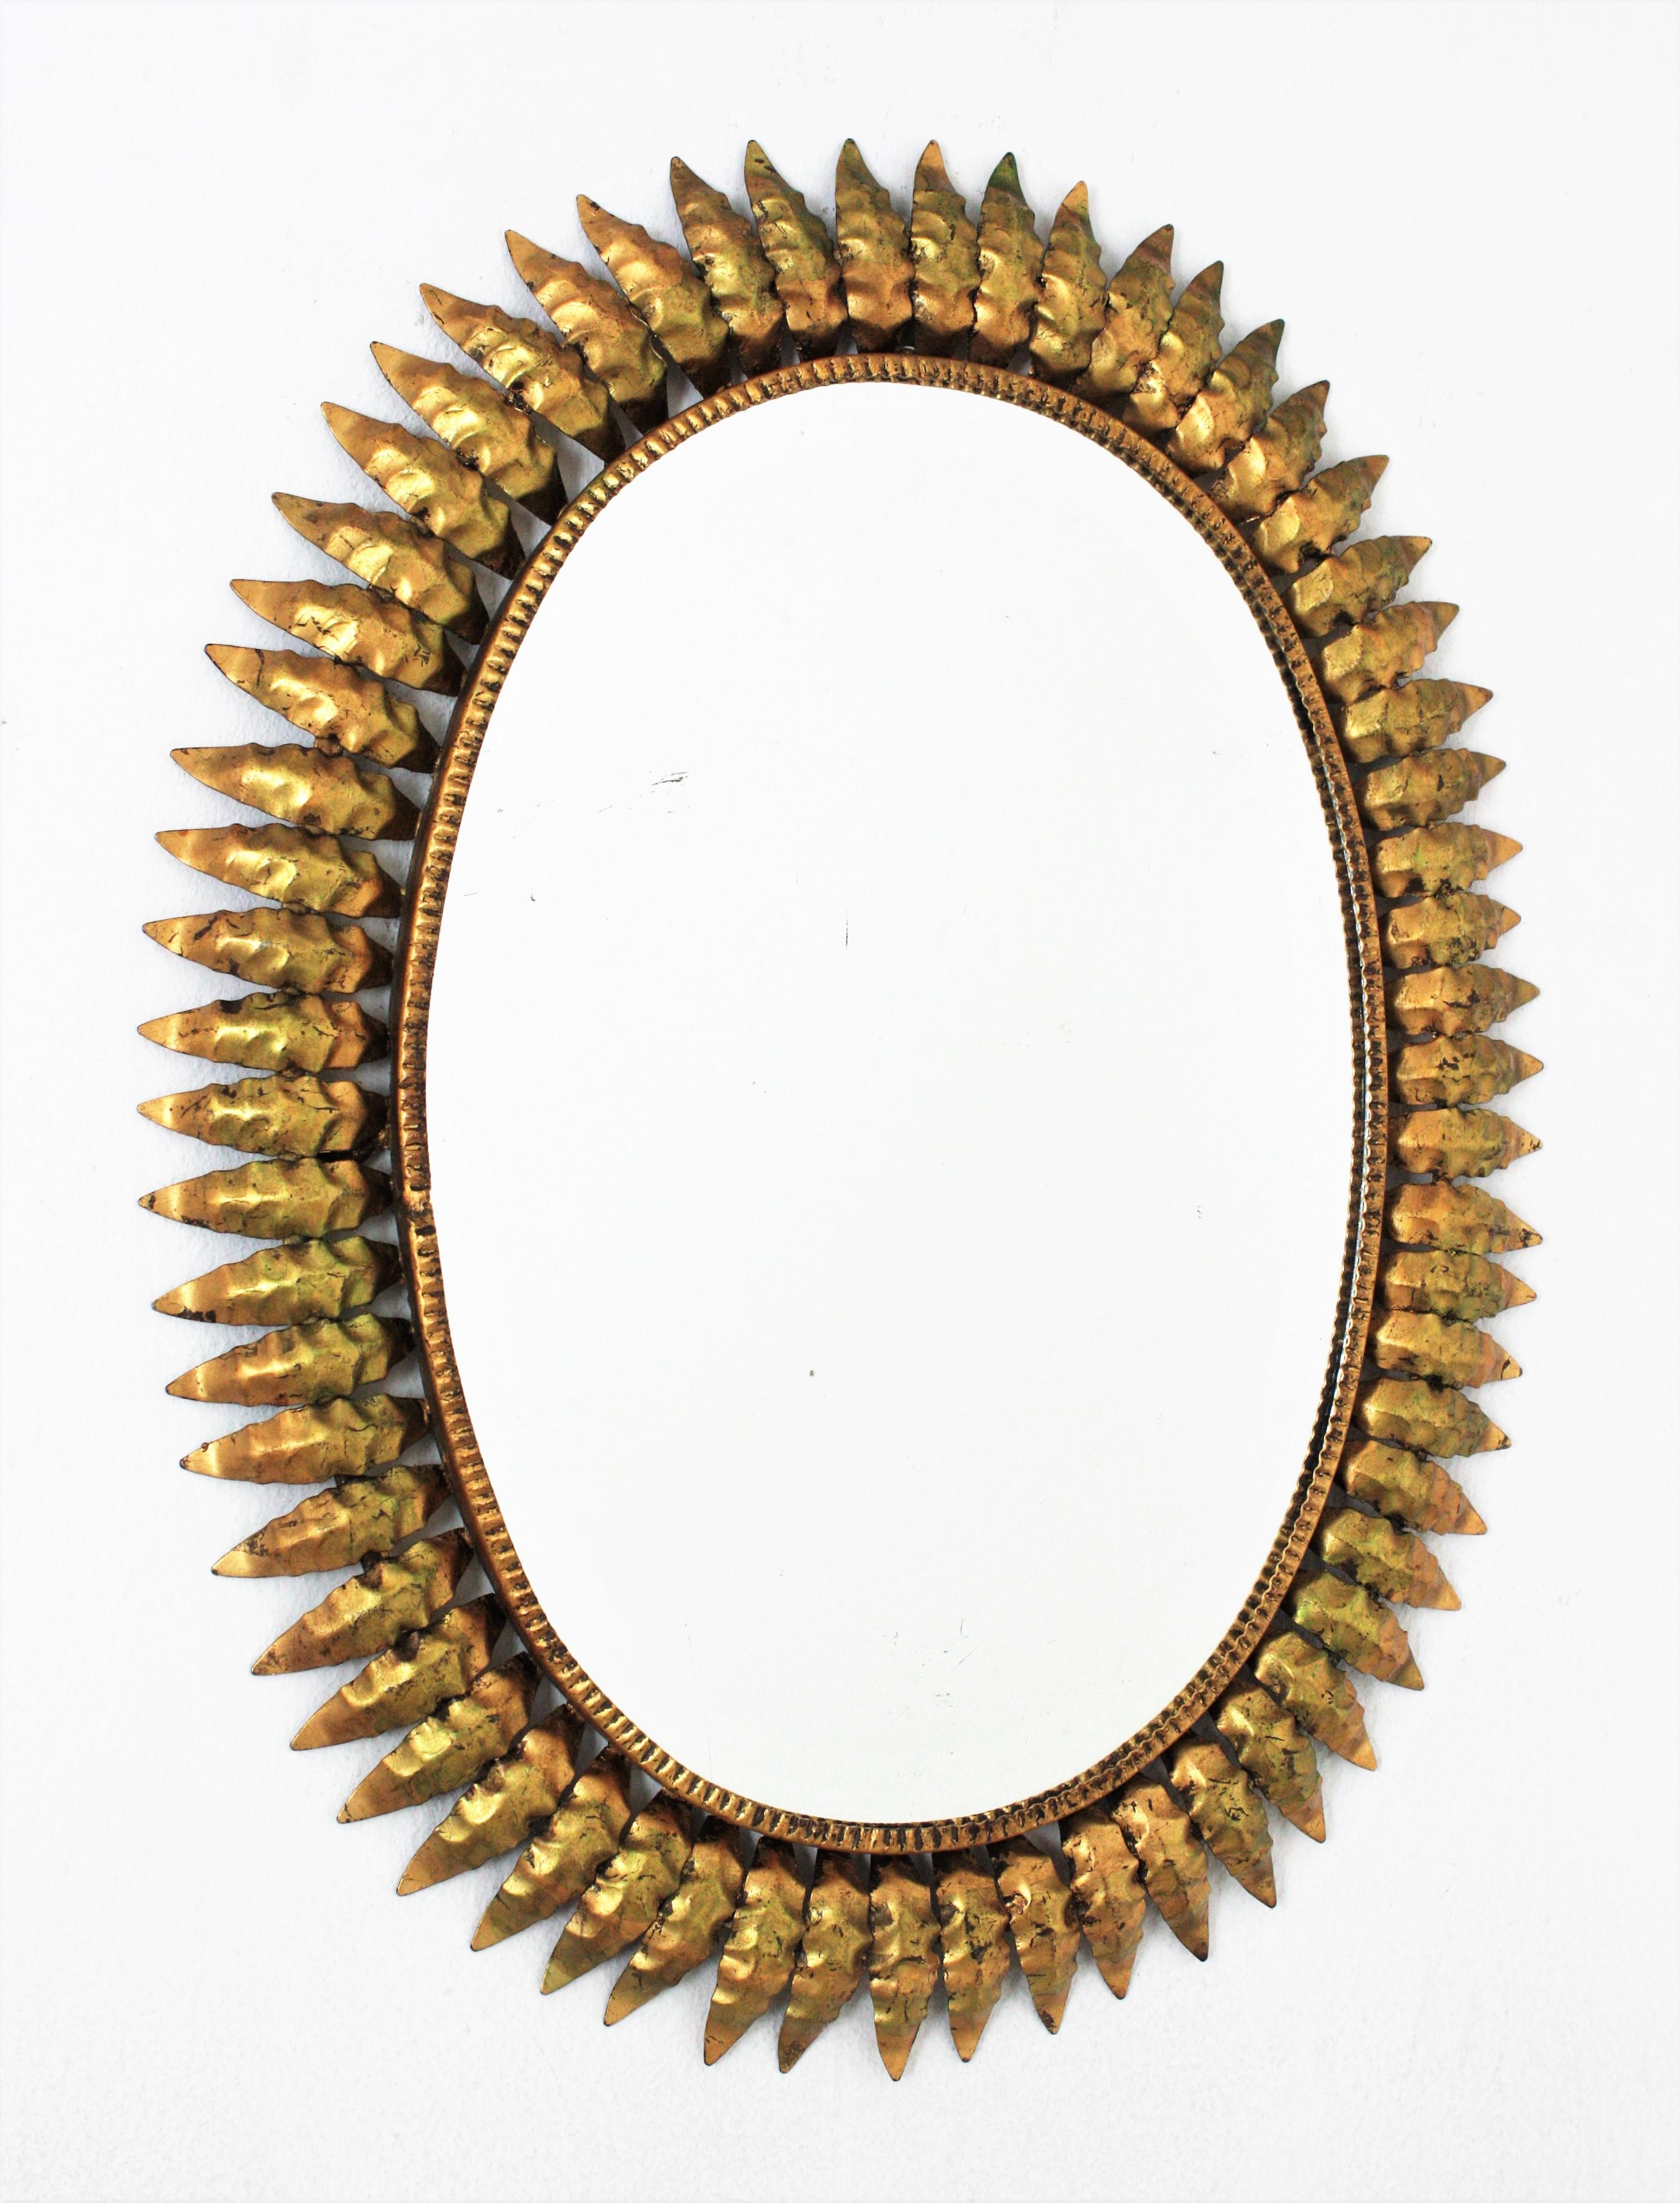 Spanishs sunburst mirror, Gold Leaf, Iron, 1950s
Mid-Century Modern hand-hammered iron sunburst oval wall mirror with gold leaf finish
This highly decorative leafed sunburst gilt iron mirror has a nice patina and gold leaf gilding and green